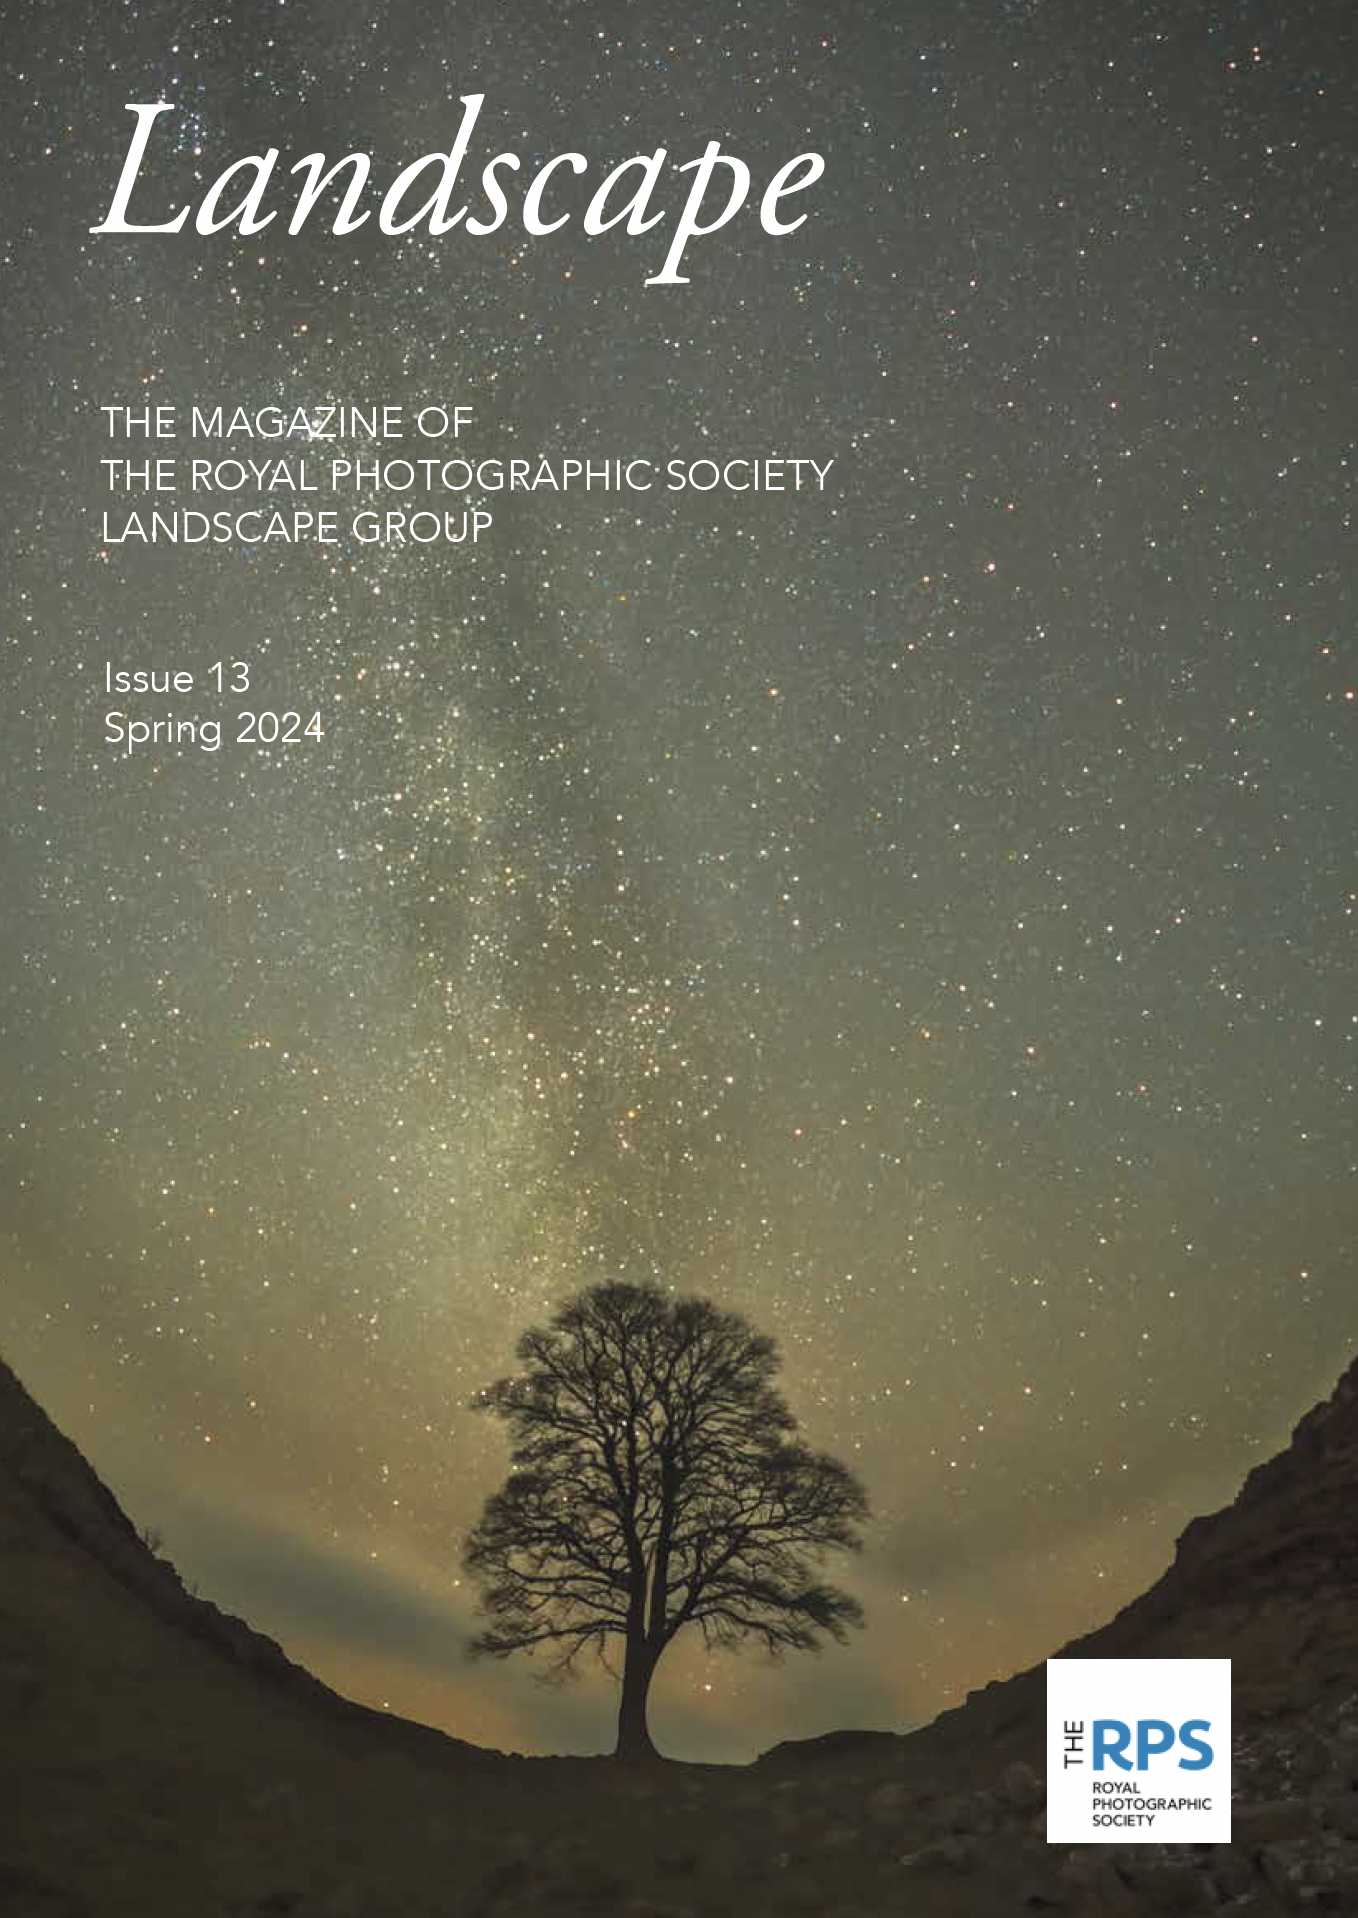 RPS Landscape Magazine Issue 13 Cover